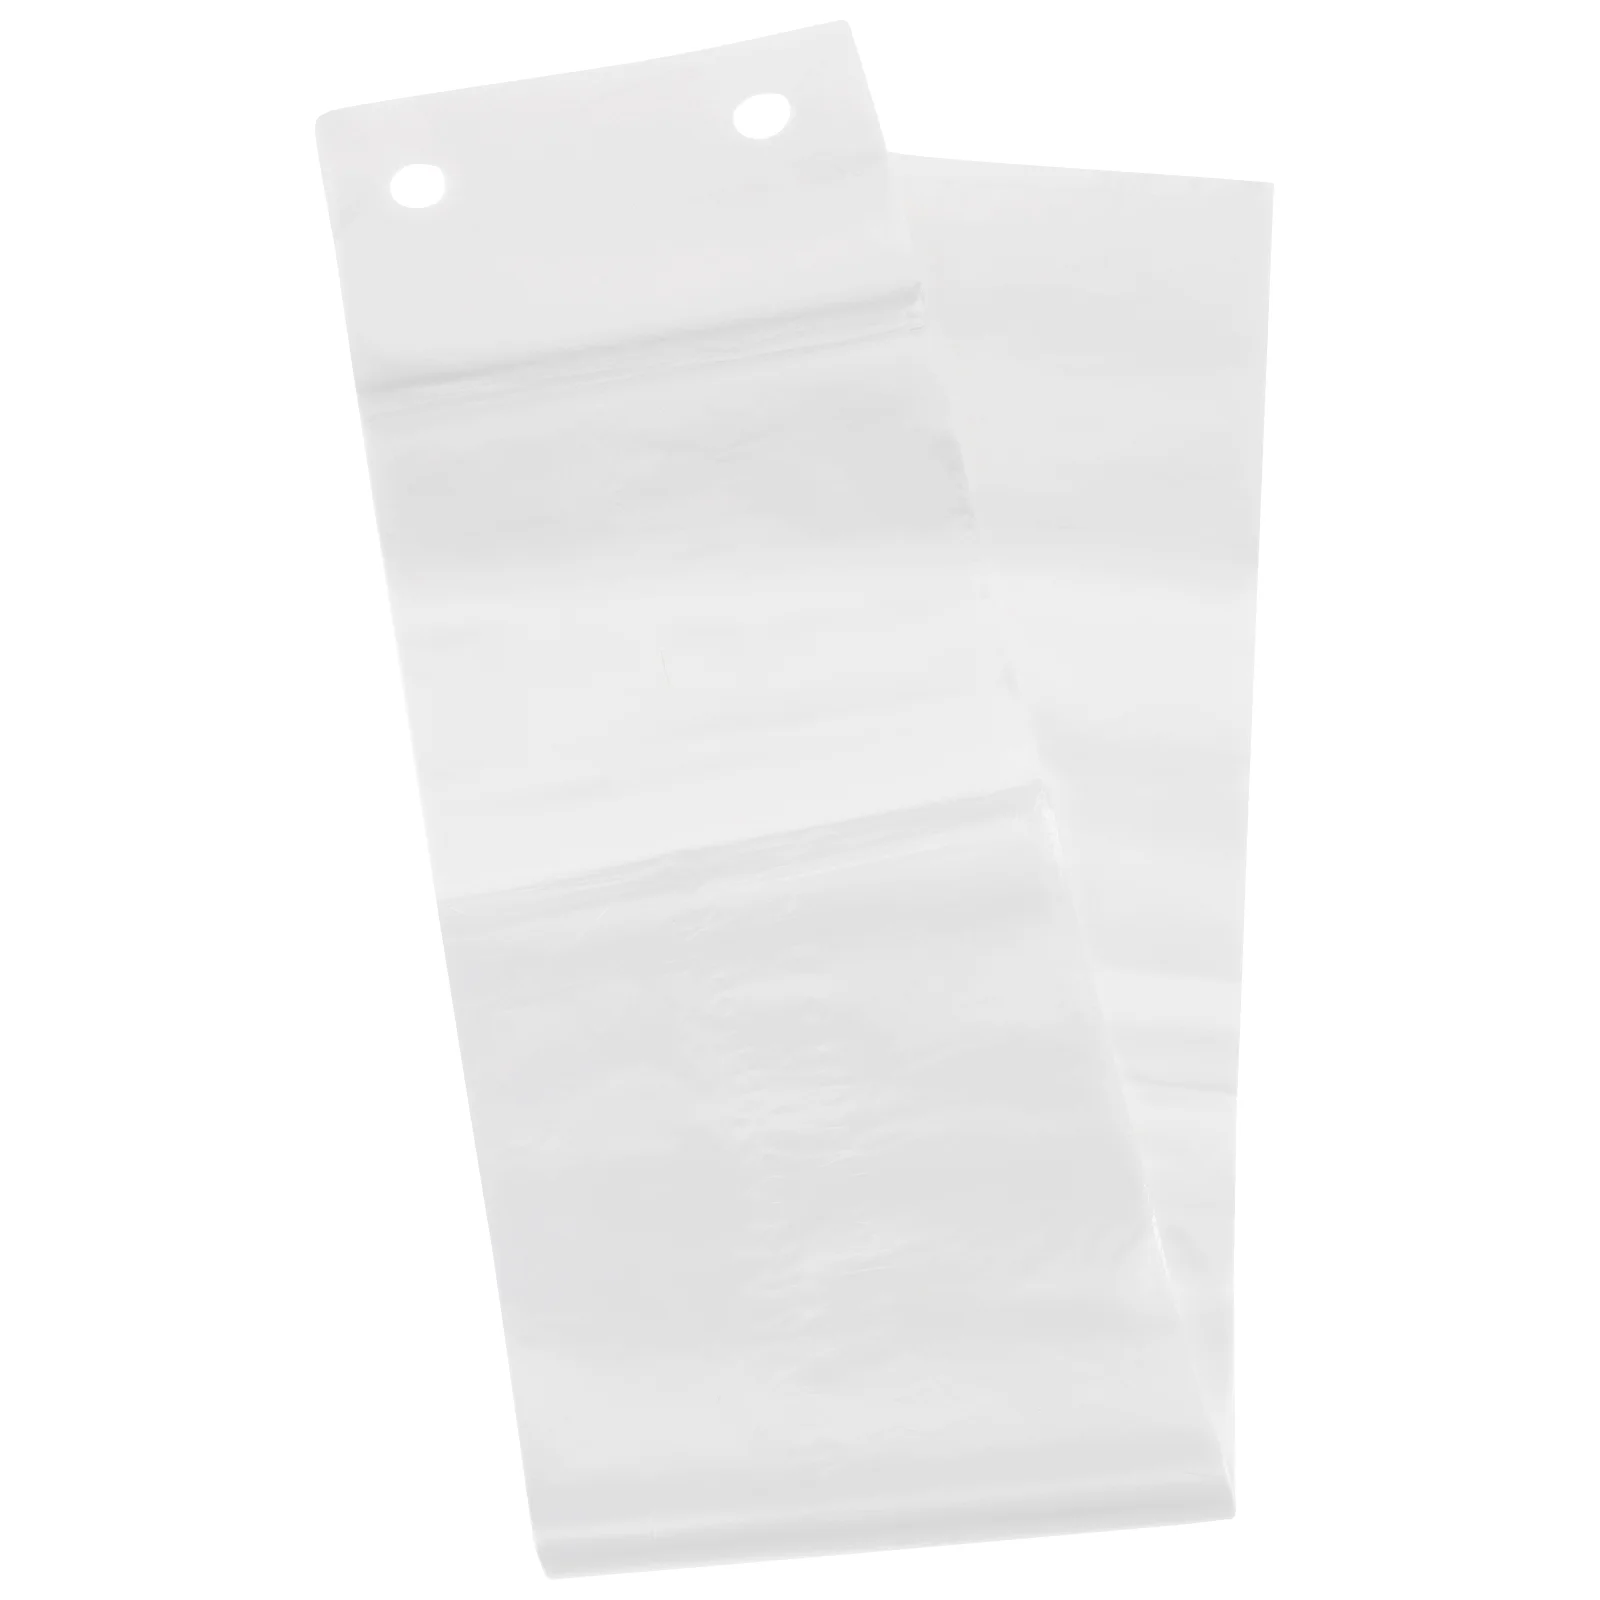 

100pcs Wet Bags Refills 13x72cm Bags Container for Rainy Day Cleanup Accidents Slips